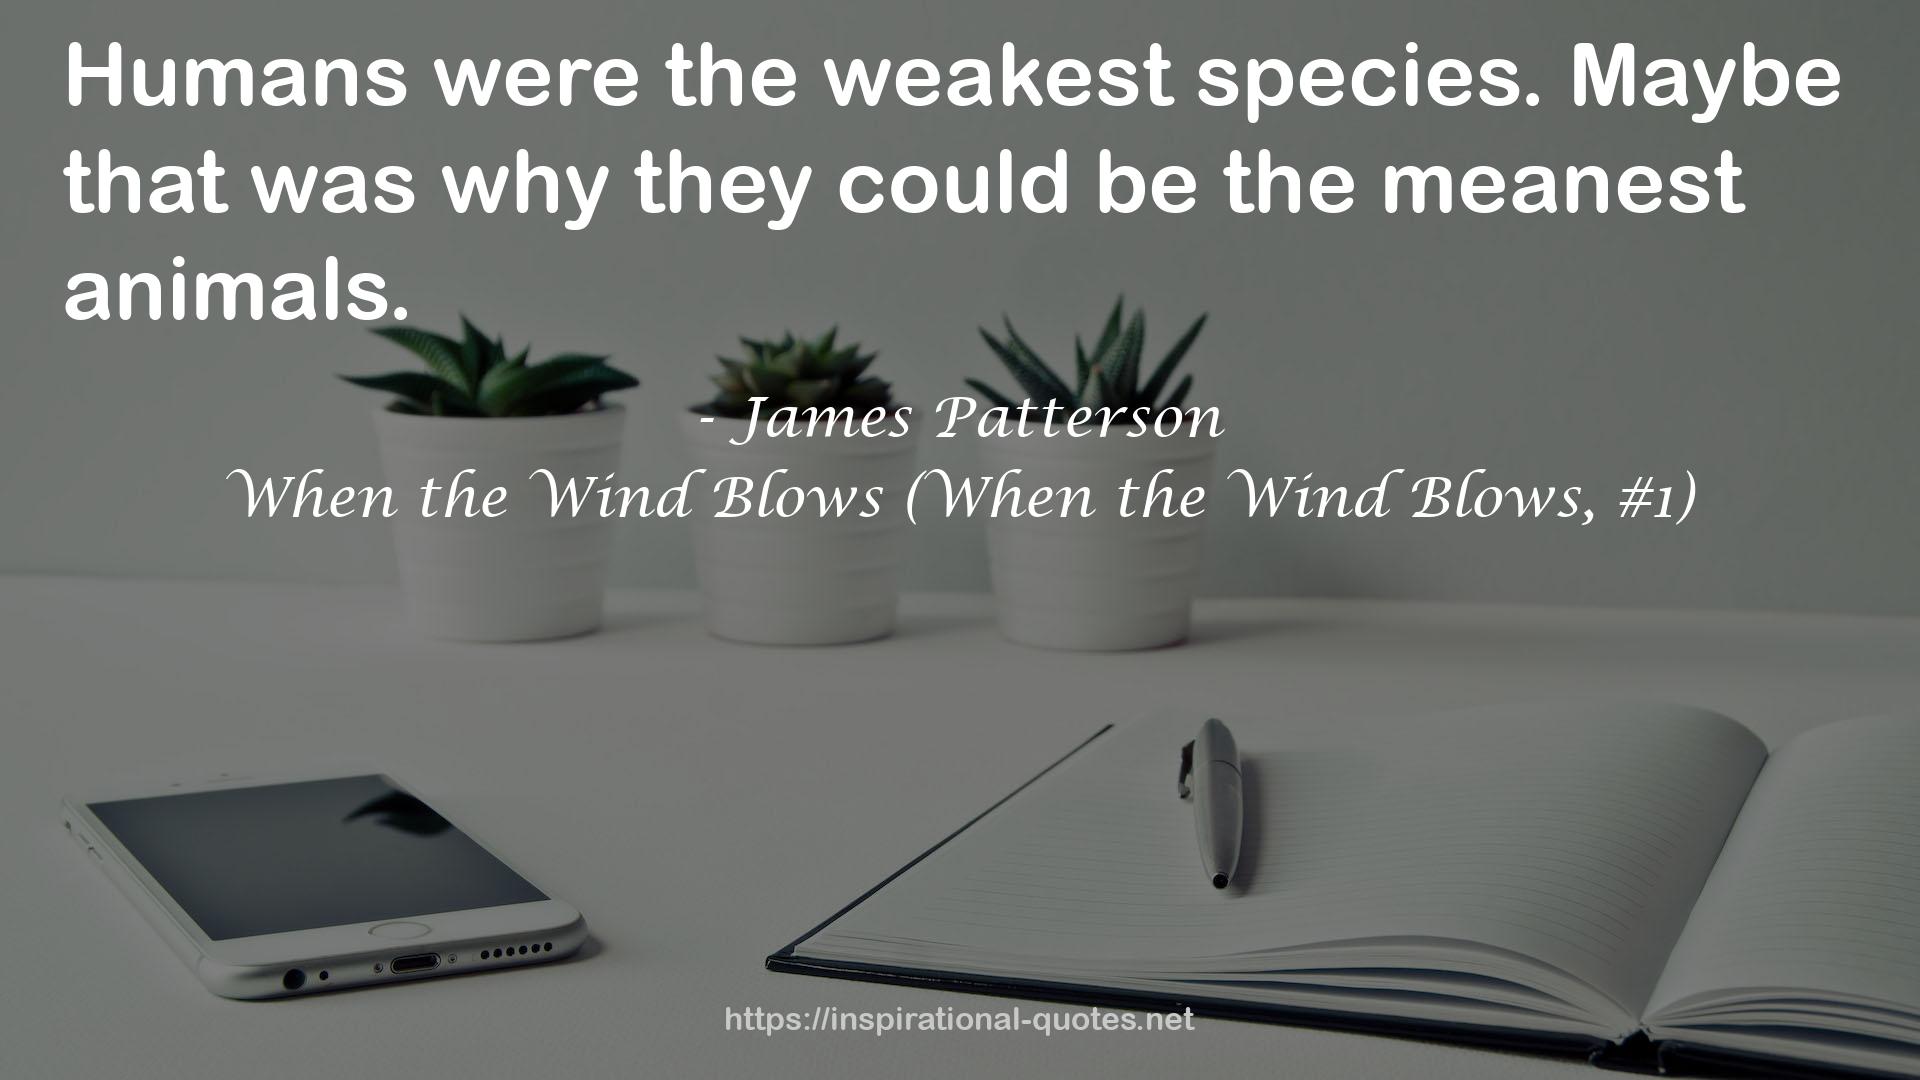 When the Wind Blows (When the Wind Blows, #1) QUOTES